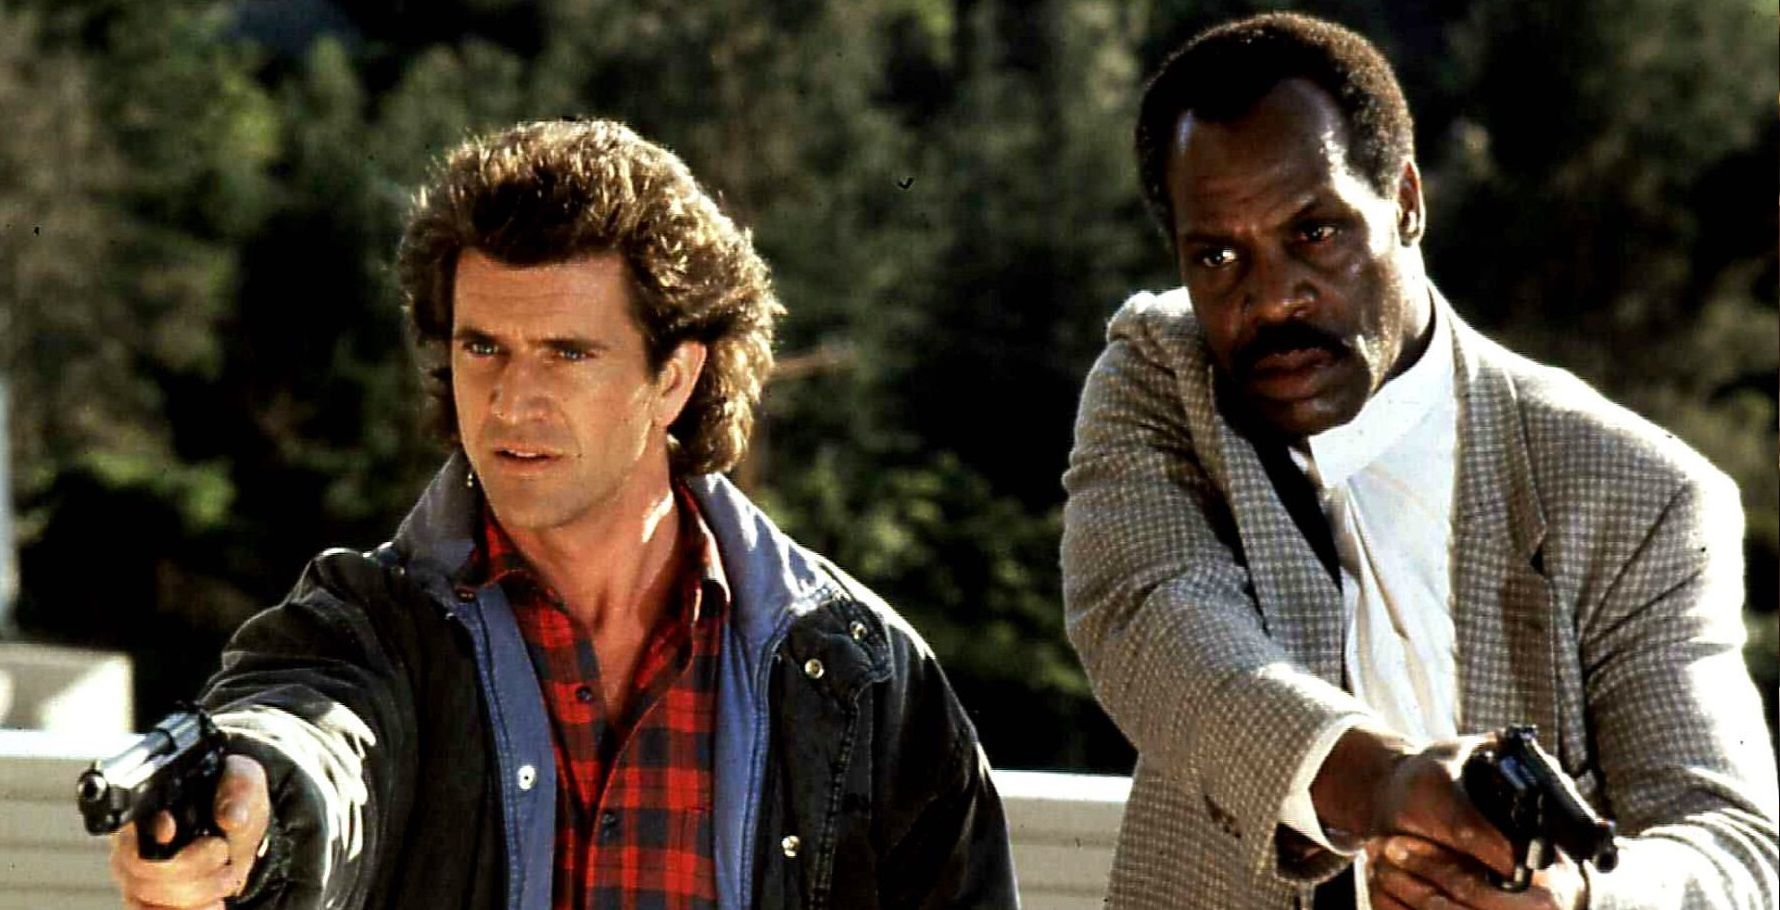 10 Buddy Cop Movies To Watch If You Like Lethal Weapon